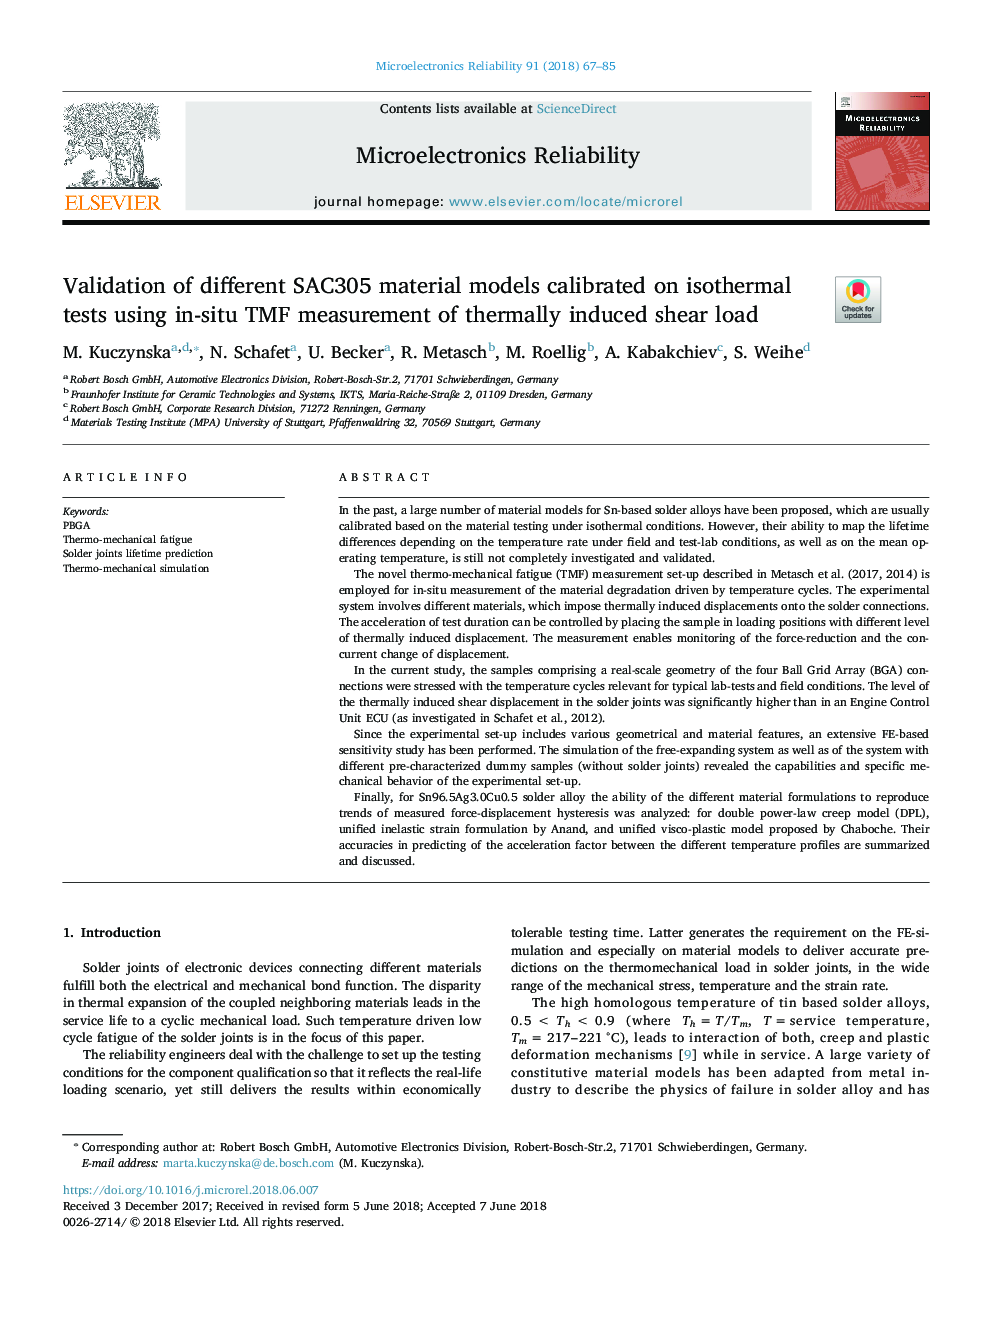 Validation of different SAC305 material models calibrated on isothermal tests using in-situ TMF measurement of thermally induced shear load